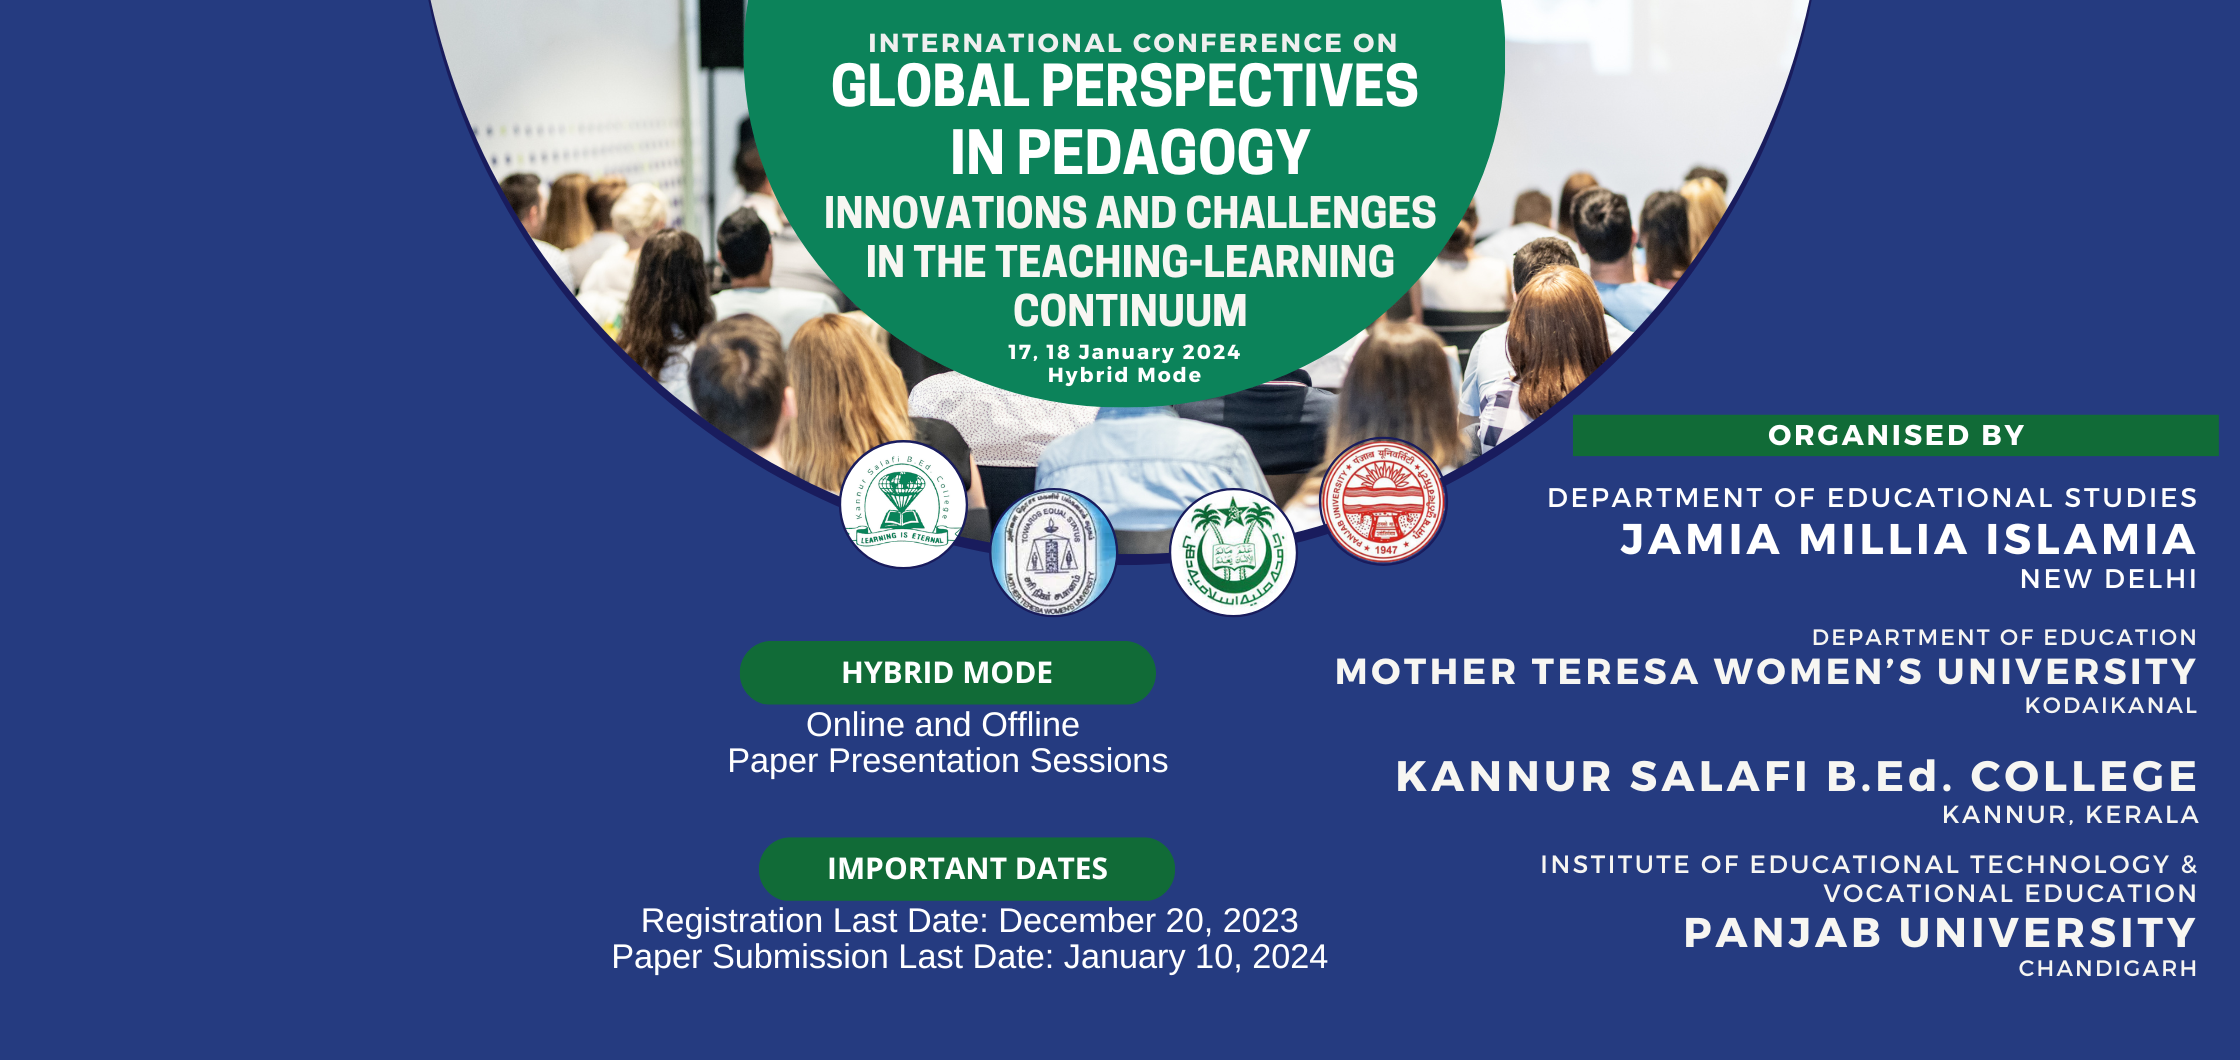 International Conference on Global Perspectives in Pedagogy: Innovations and Challenges in the Teaching-Learning Continuum